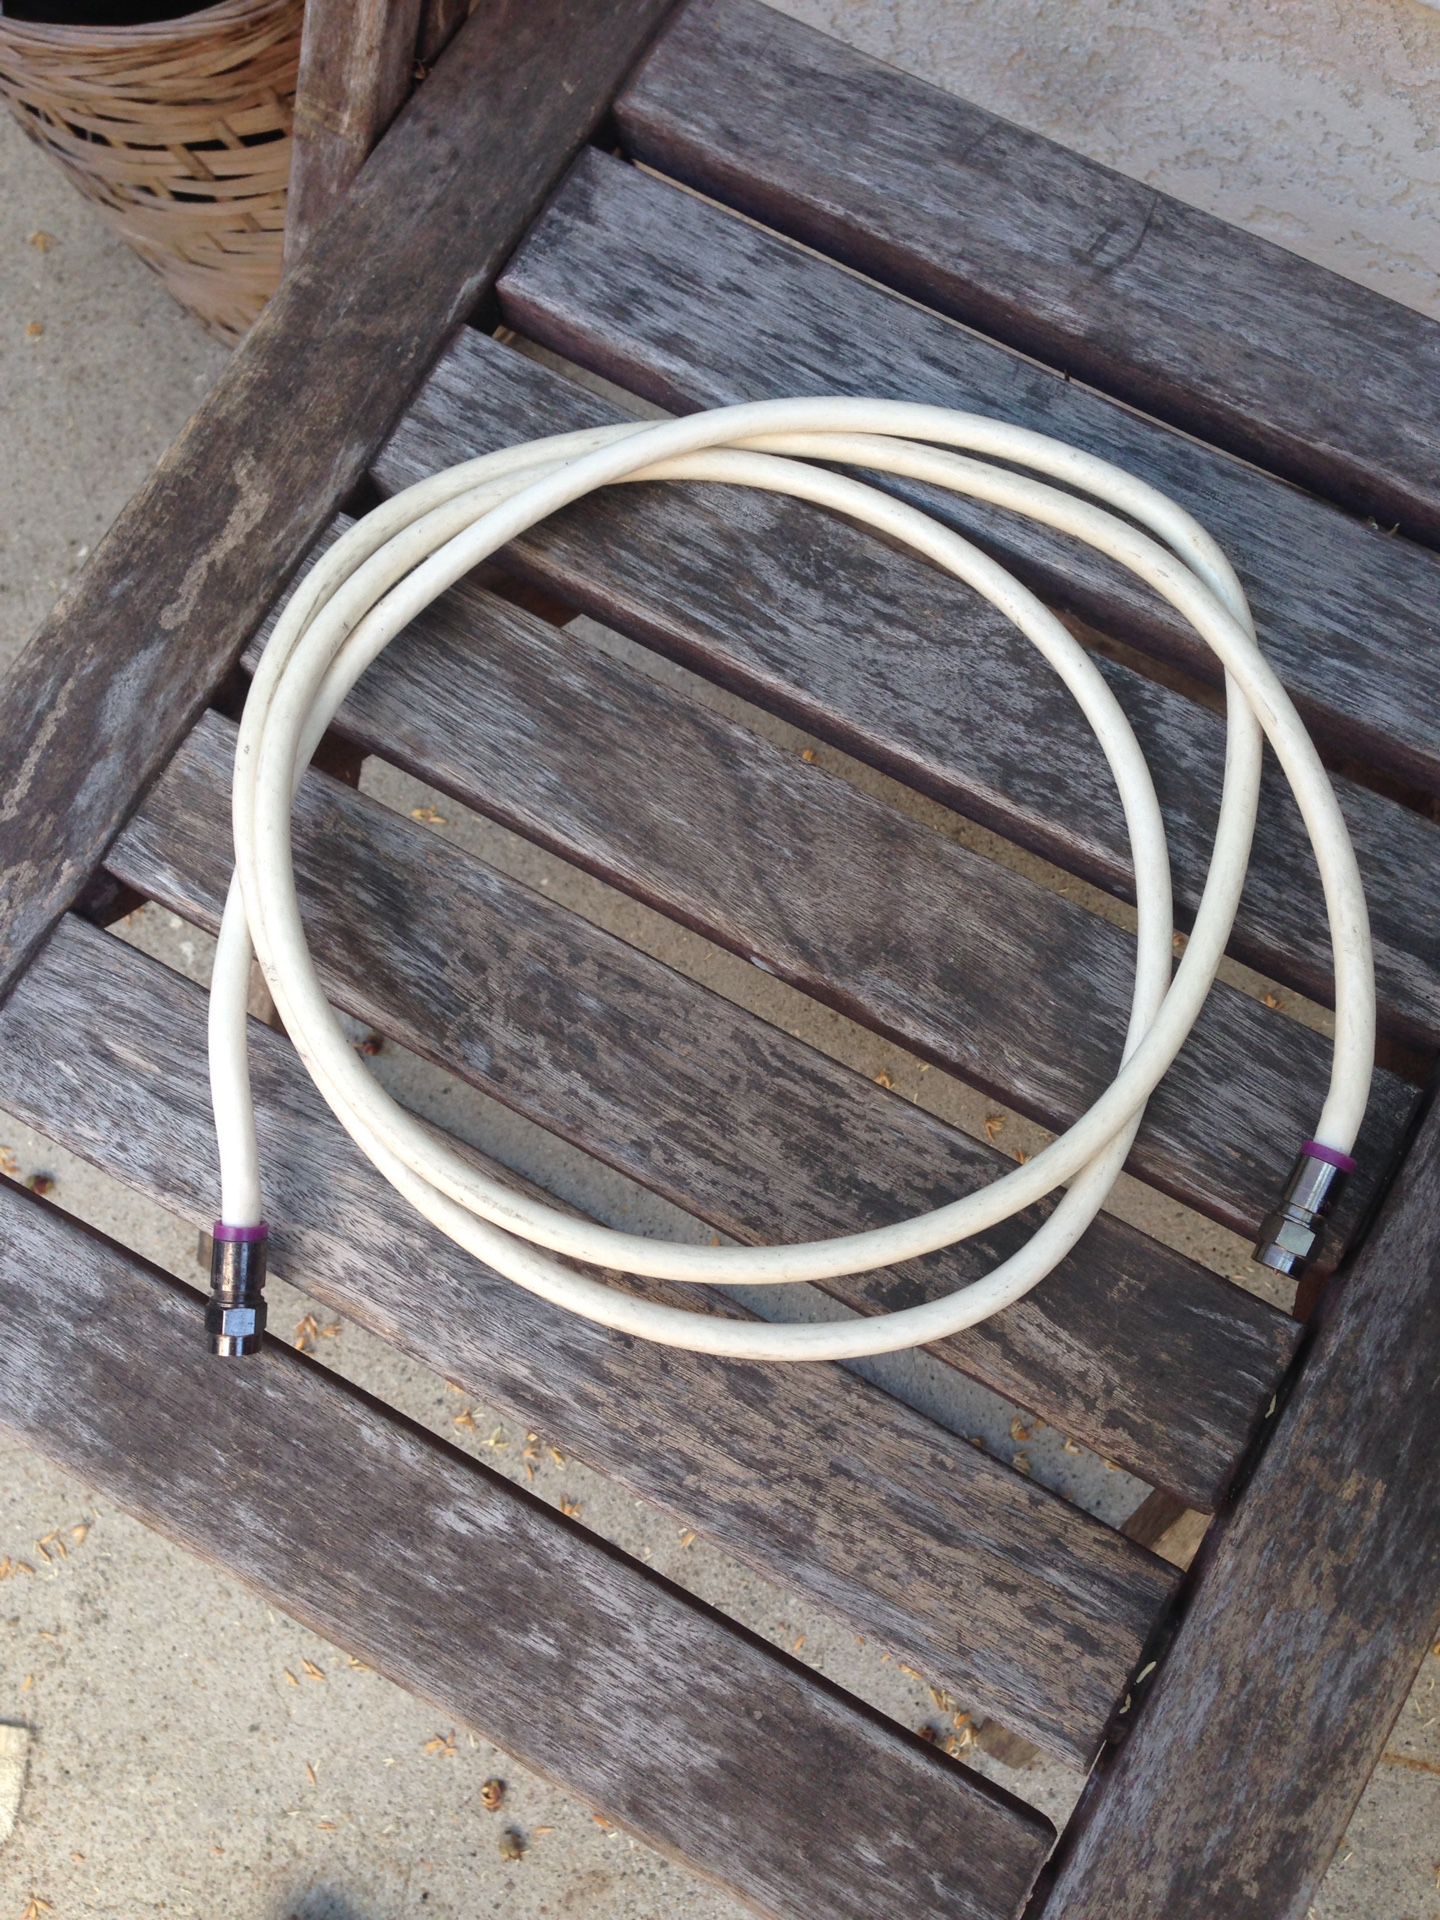 72" coaxial cable. Good condition